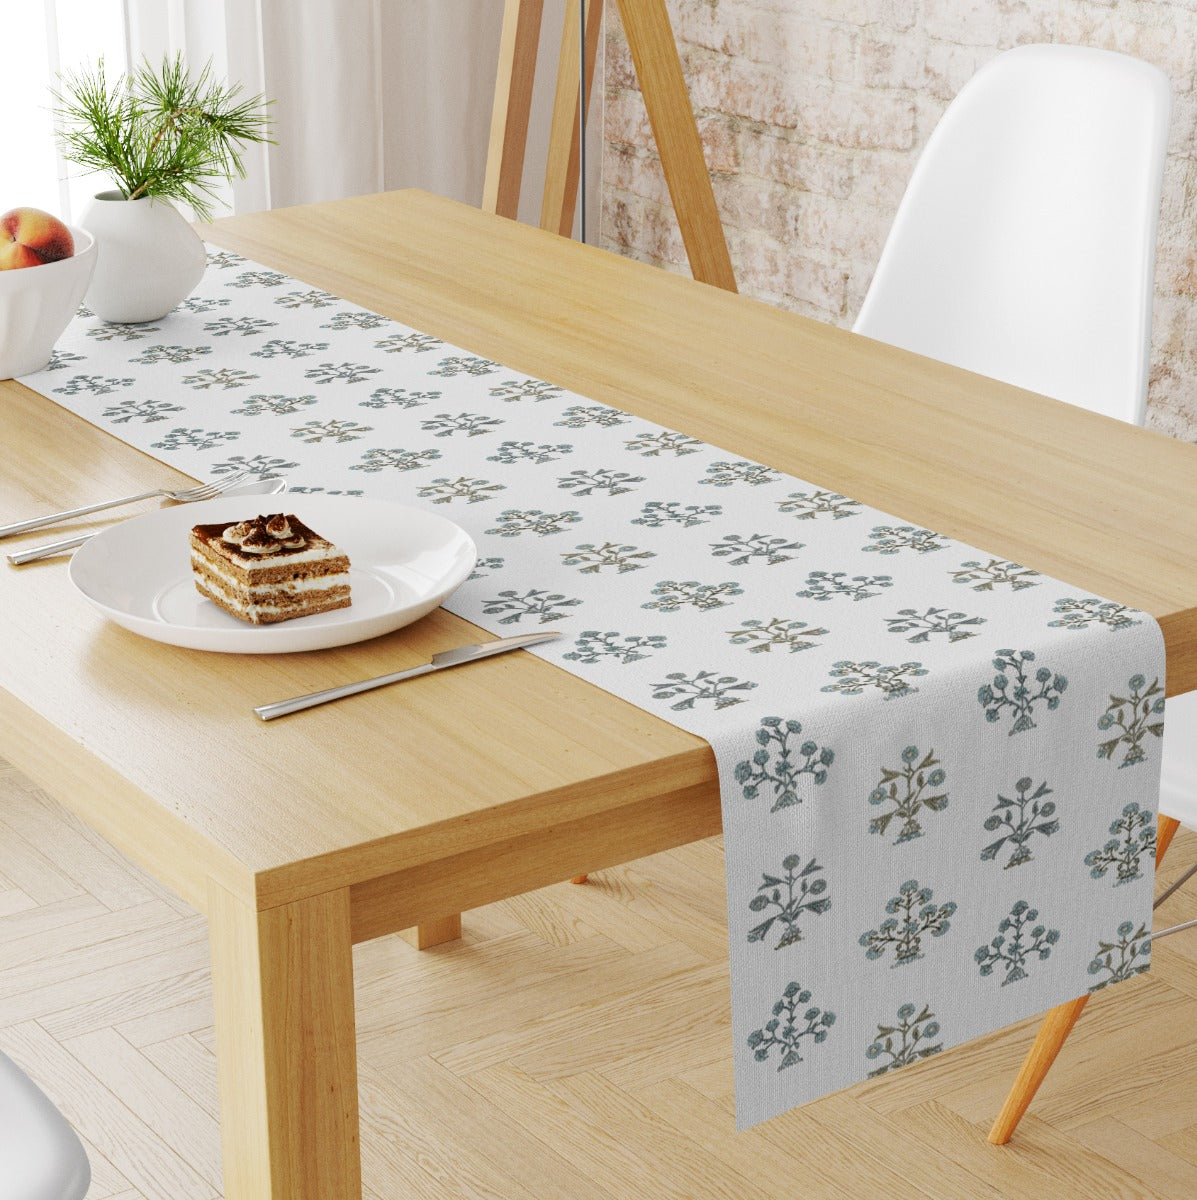 Floral Bunch Table Runner